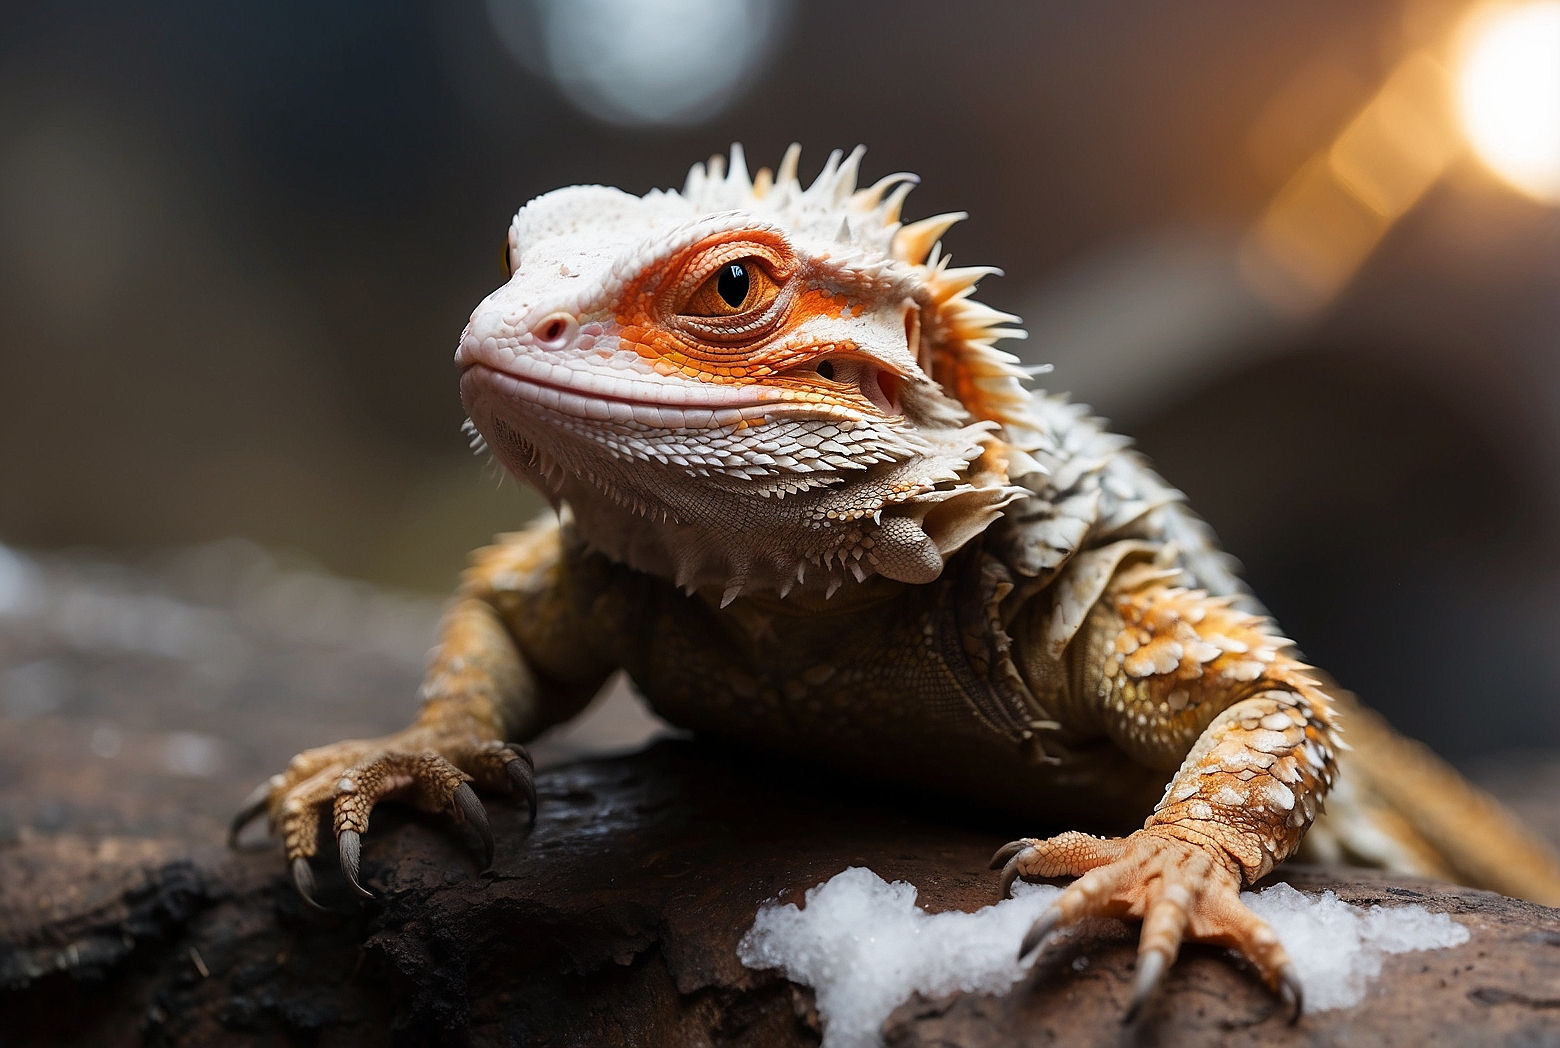 What’s The Lowest Temperature A Bearded Dragon Can Be In?